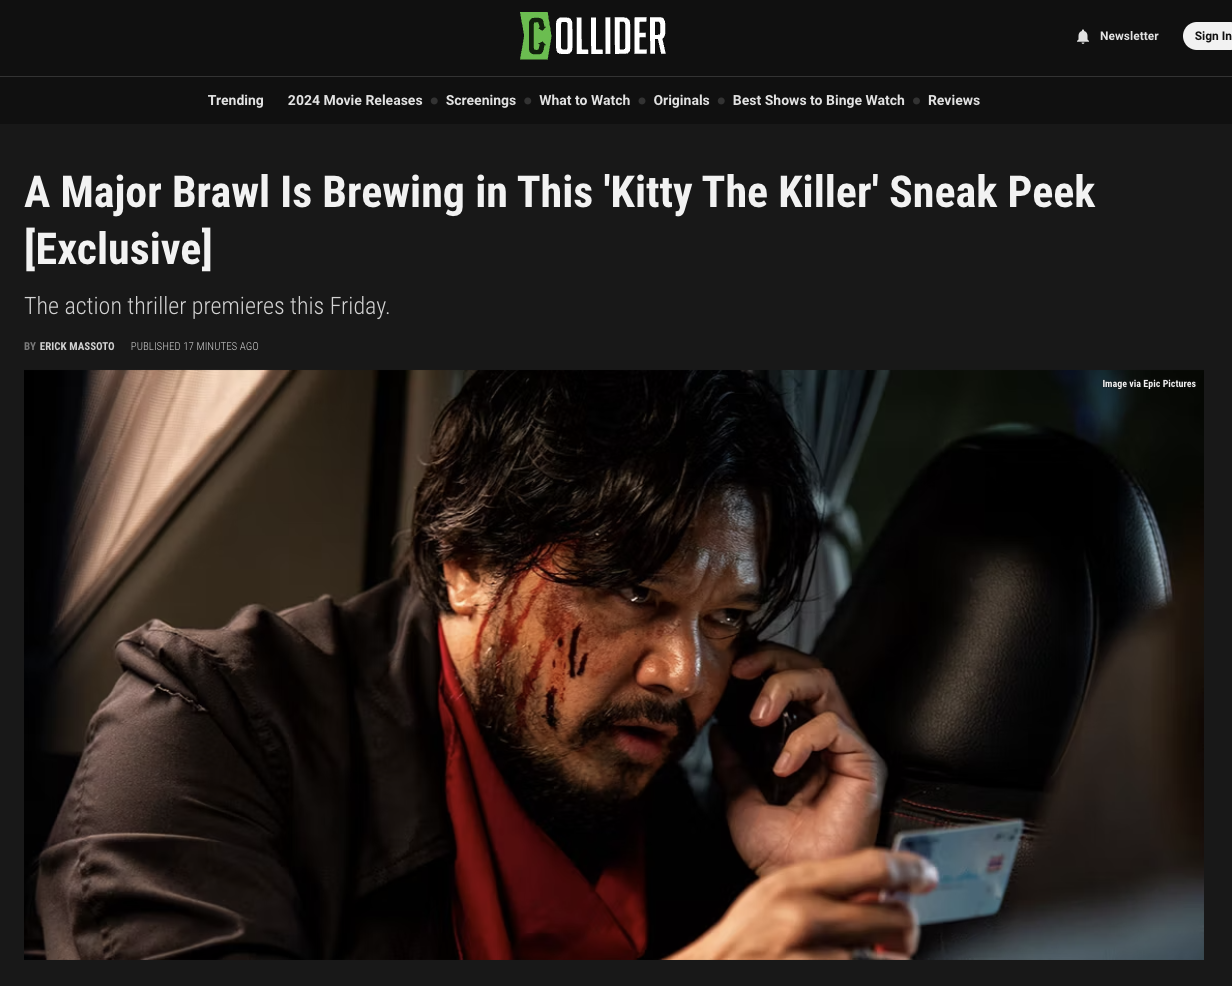 A Major Brawl Is Brewing in This 'Kitty The Killer' Sneak Peek [Exclusive]